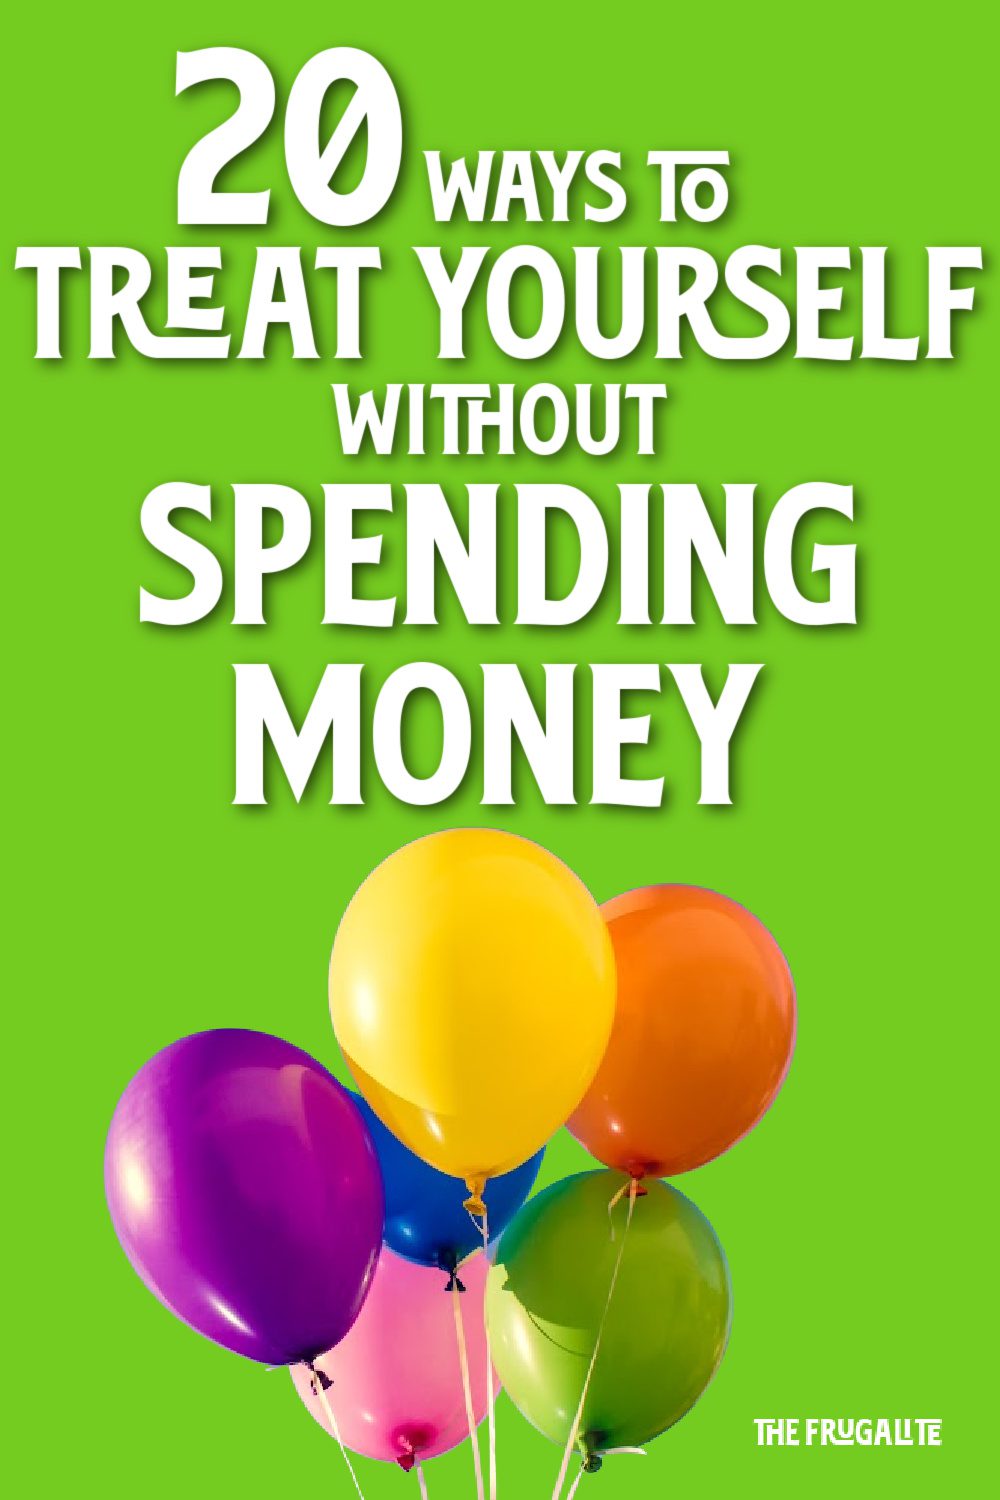 20 Ways to Treat Yourself Without Spending Money